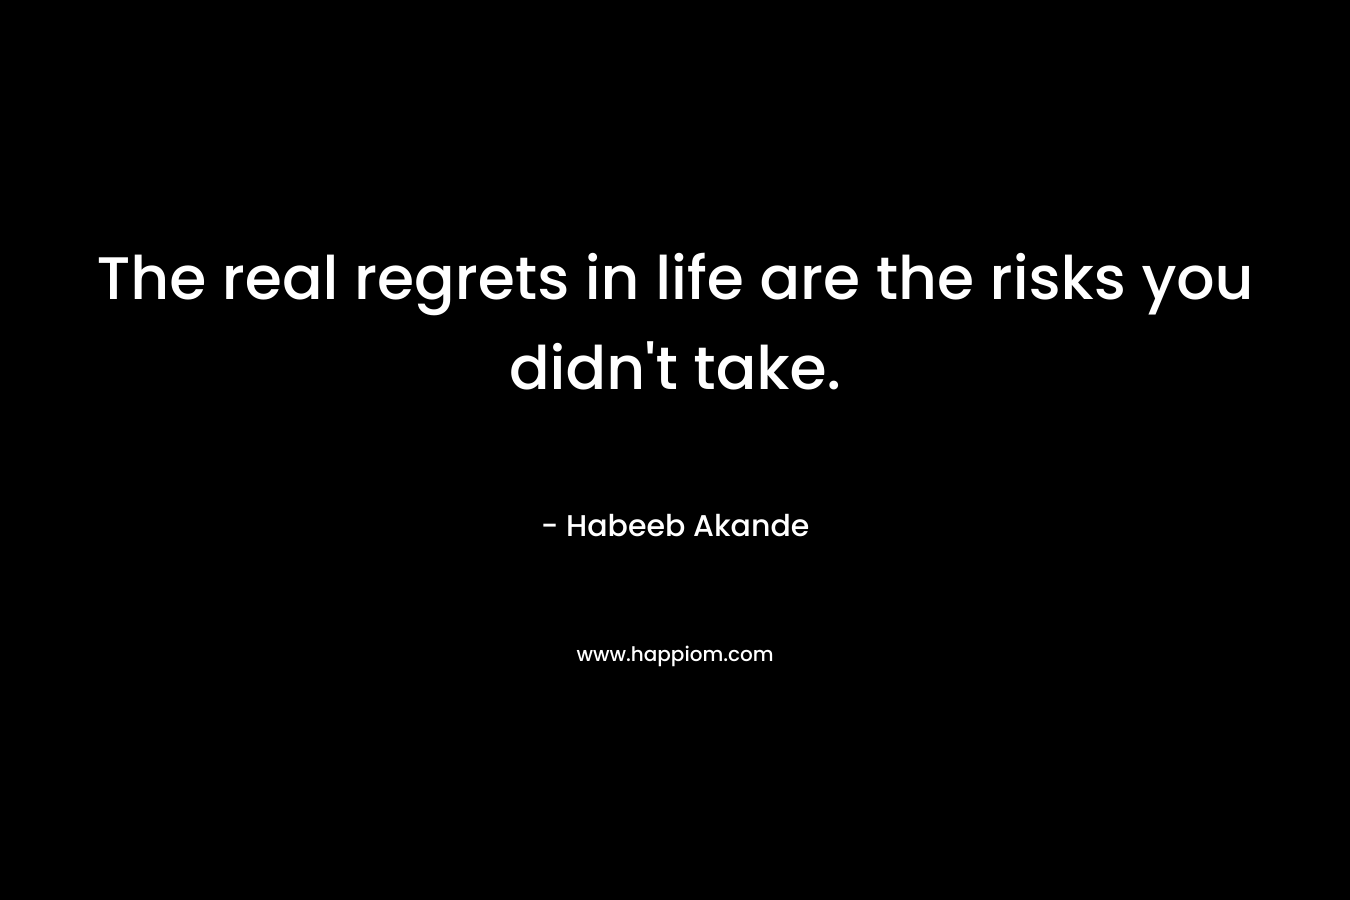 The real regrets in life are the risks you didn’t take. – Habeeb Akande